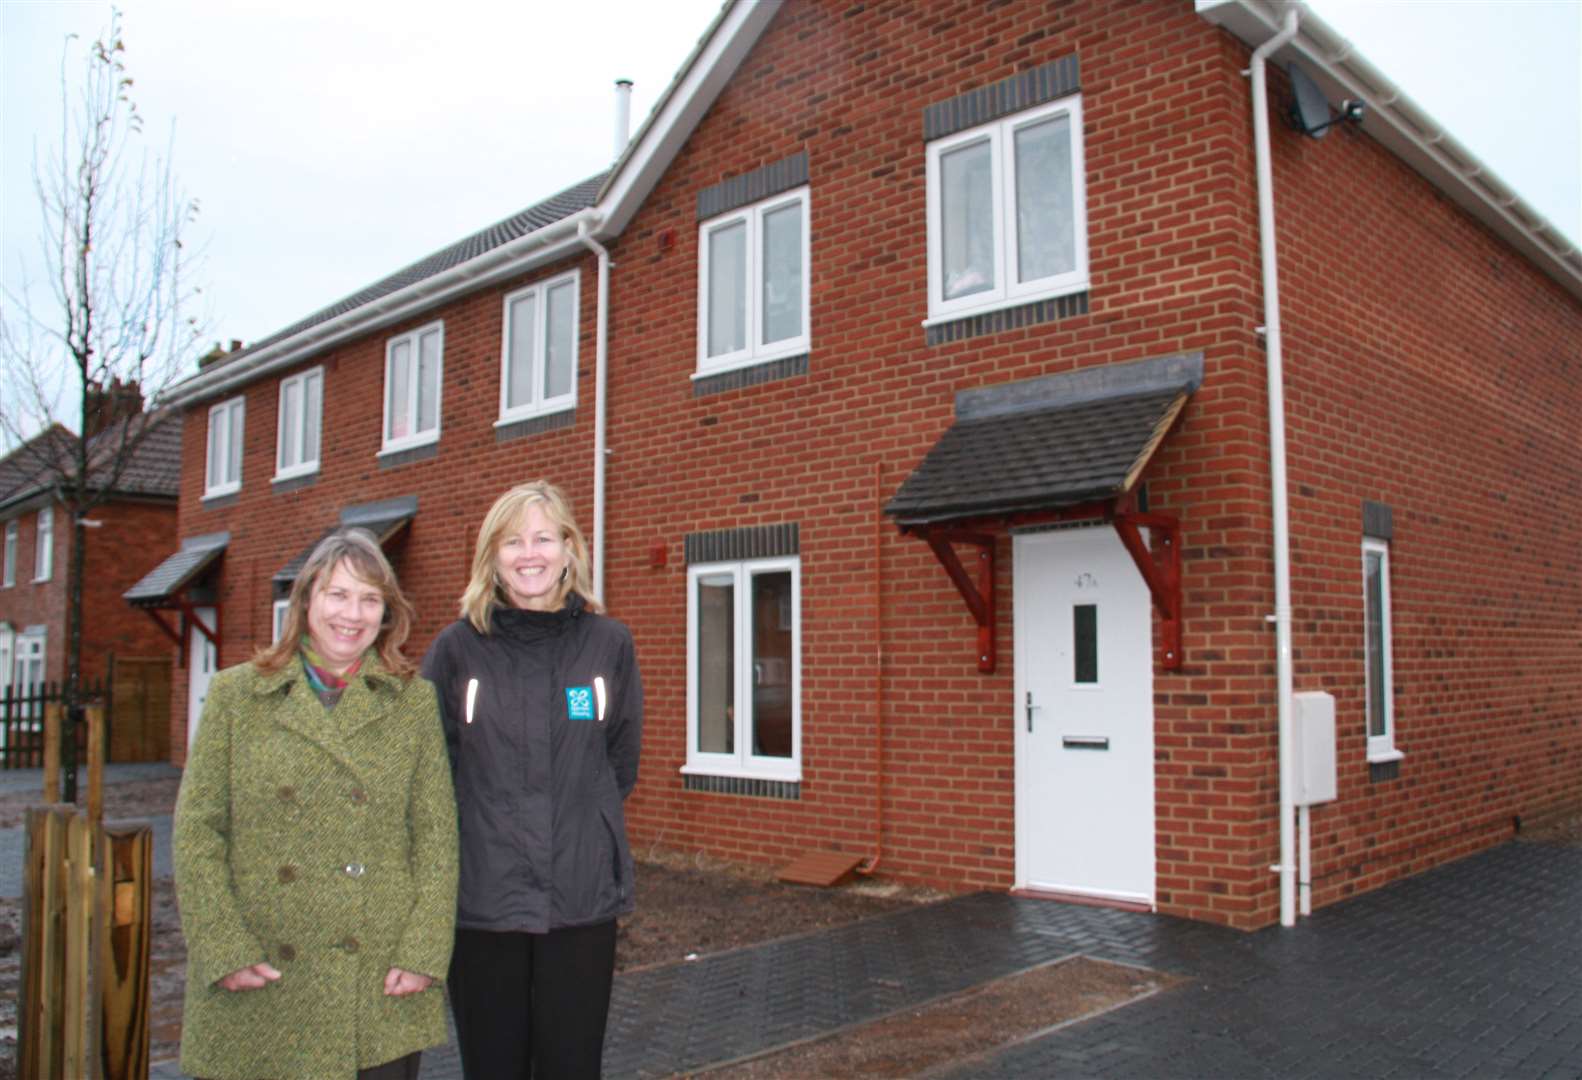 Cllr Sue Chandler, Dover District Council Cabinet Member for Housing with Verity Johnson, Housing Services Manager for East Kent Housing outside the new homes.